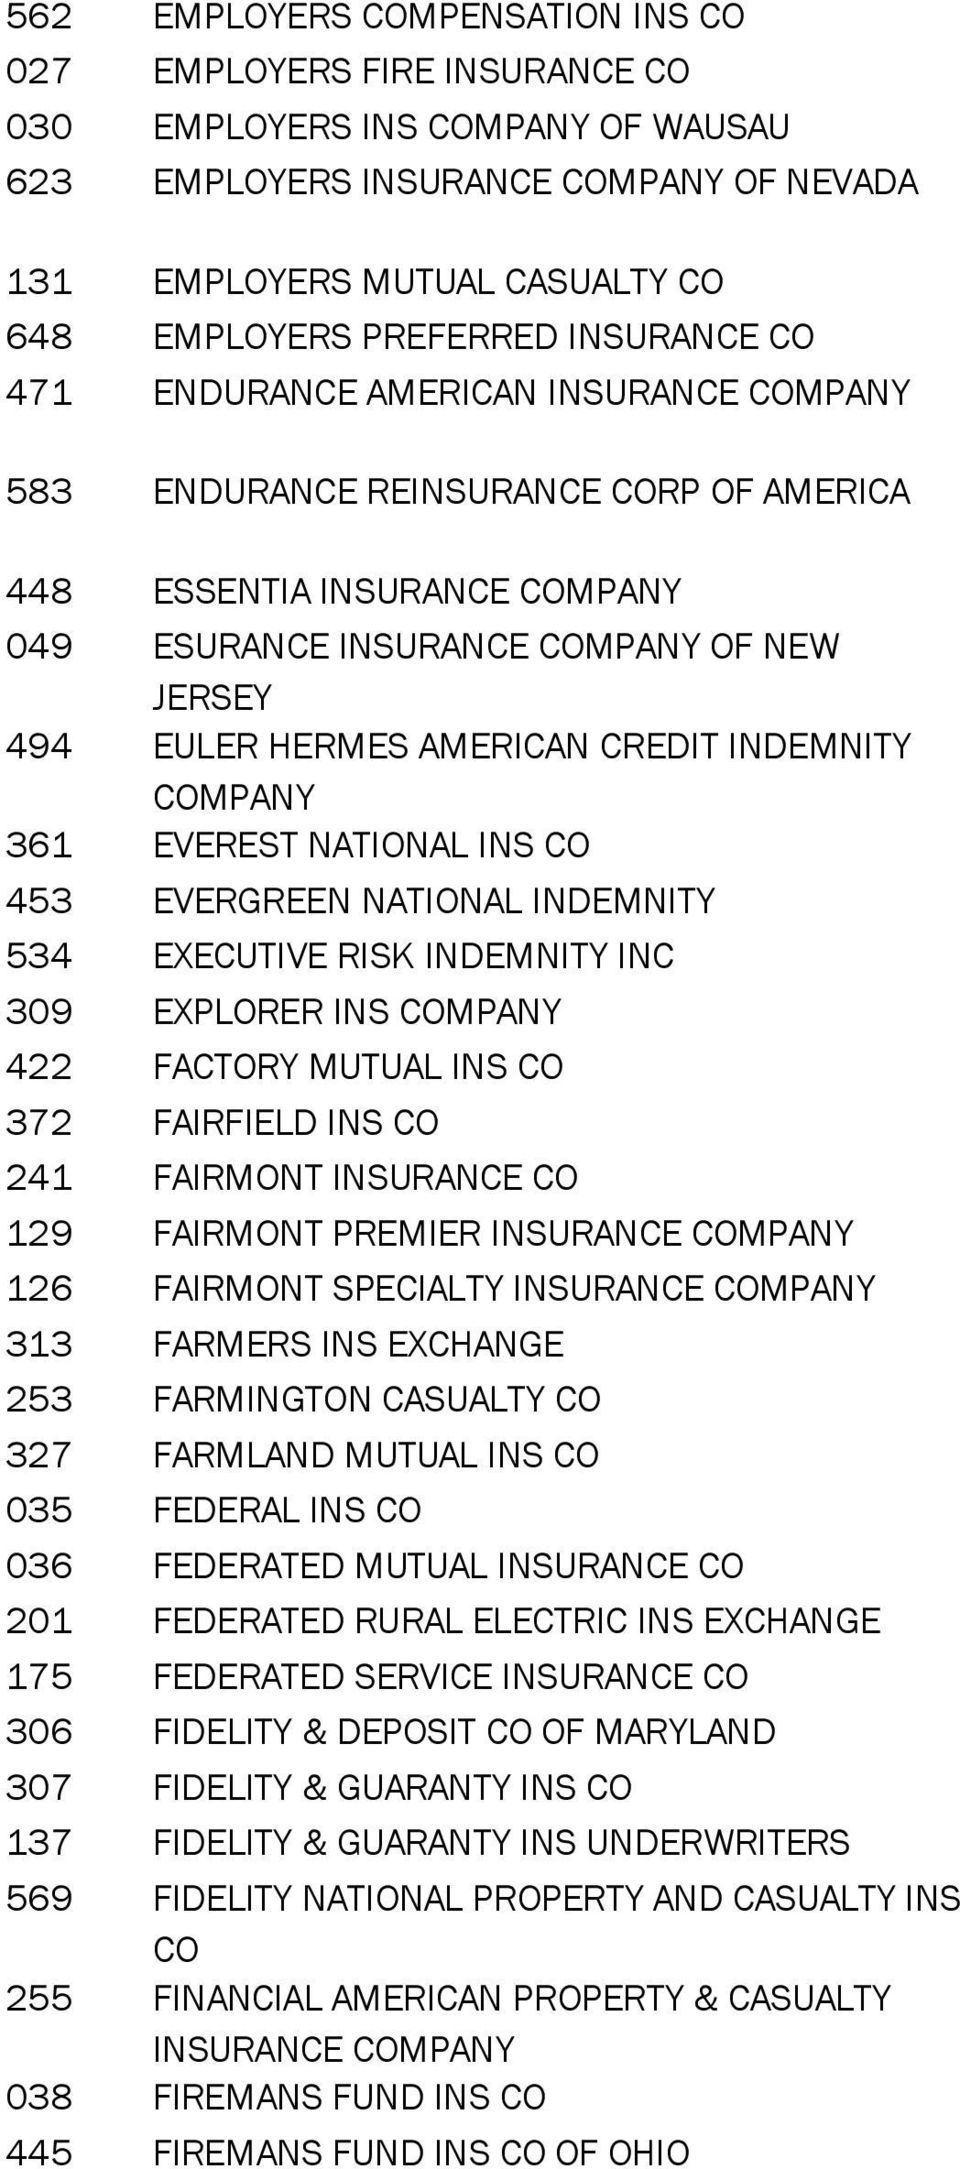 INS CO 453 EVERGREEN NATIONAL INDEMNITY 534 EXECUTIVE RISK INDEMNITY INC 309 EXPLORER INS 422 FACTORY MUTUAL INS CO 372 FAIRFIELD INS CO 241 FAIRMONT INSURANCE CO 129 FAIRMONT PREMIER INSURANCE 126